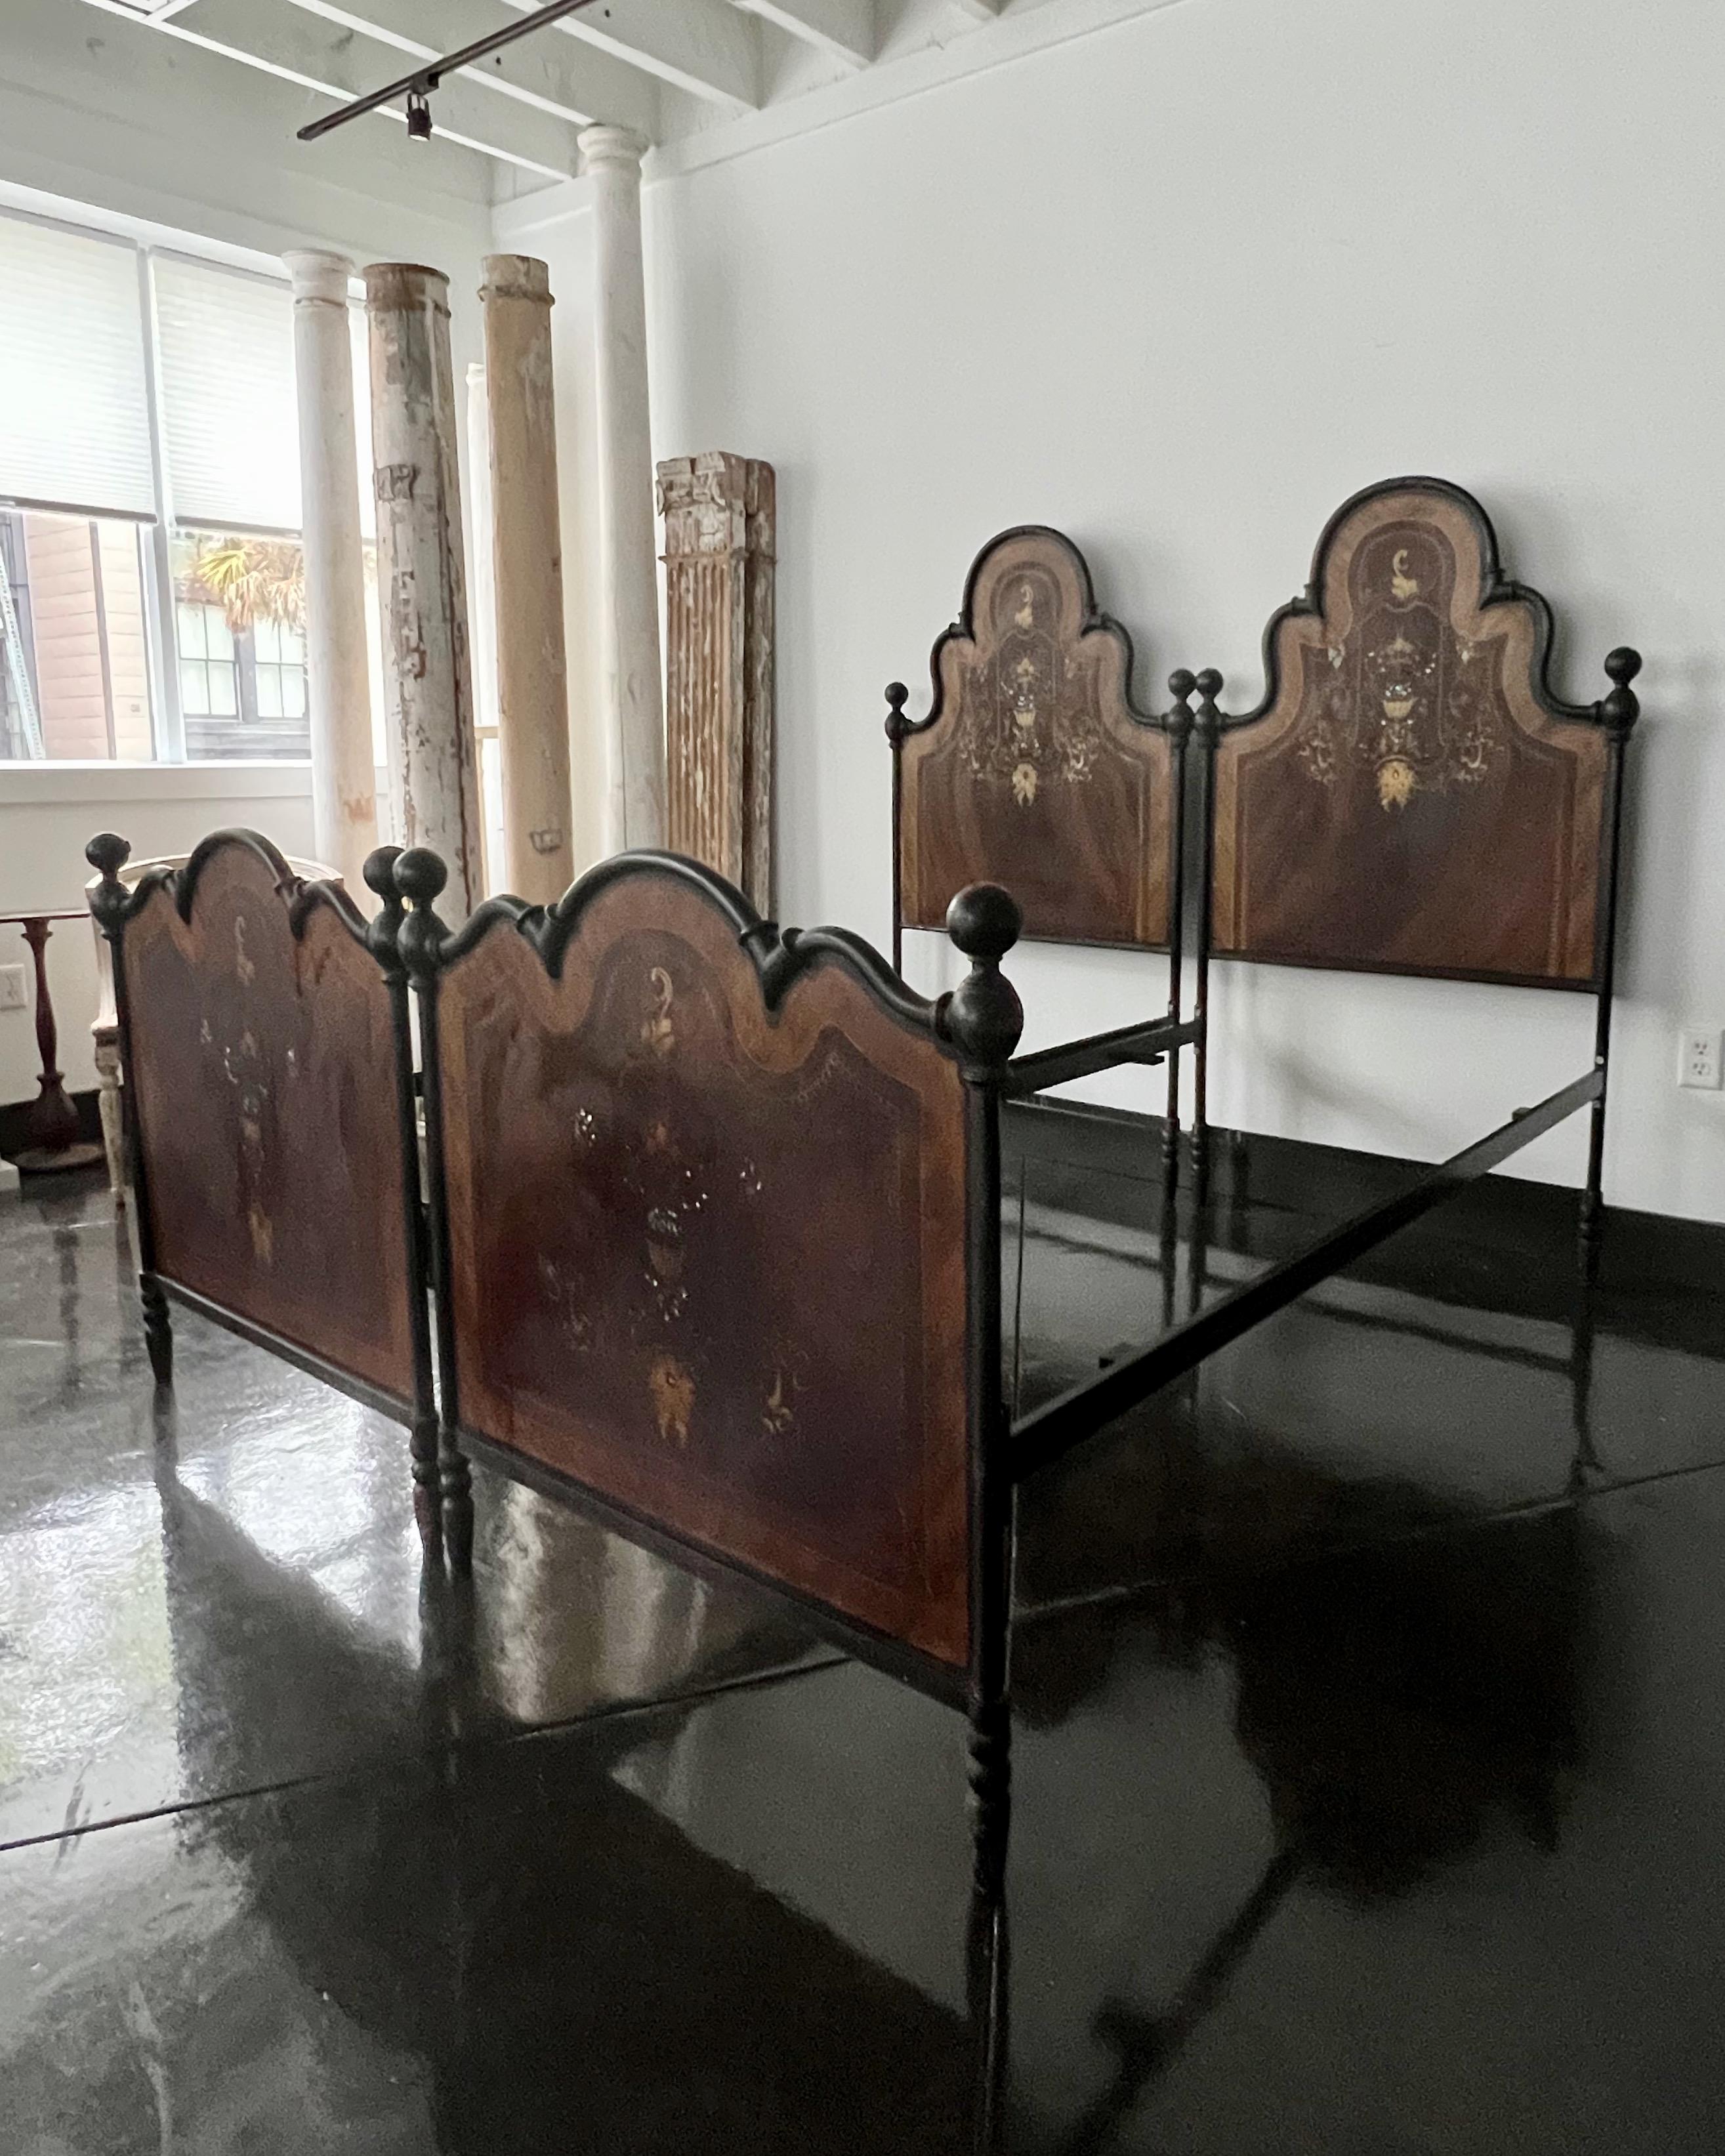 Handsome pair of Italian wrought iron/tole bed frames with hand-painted imitation wood effect with magnificent detailed floral desings and mother of pearls accents. 
Italy, 19th c.
Beds come apart for transportation.
Measures:
Beds wide 37